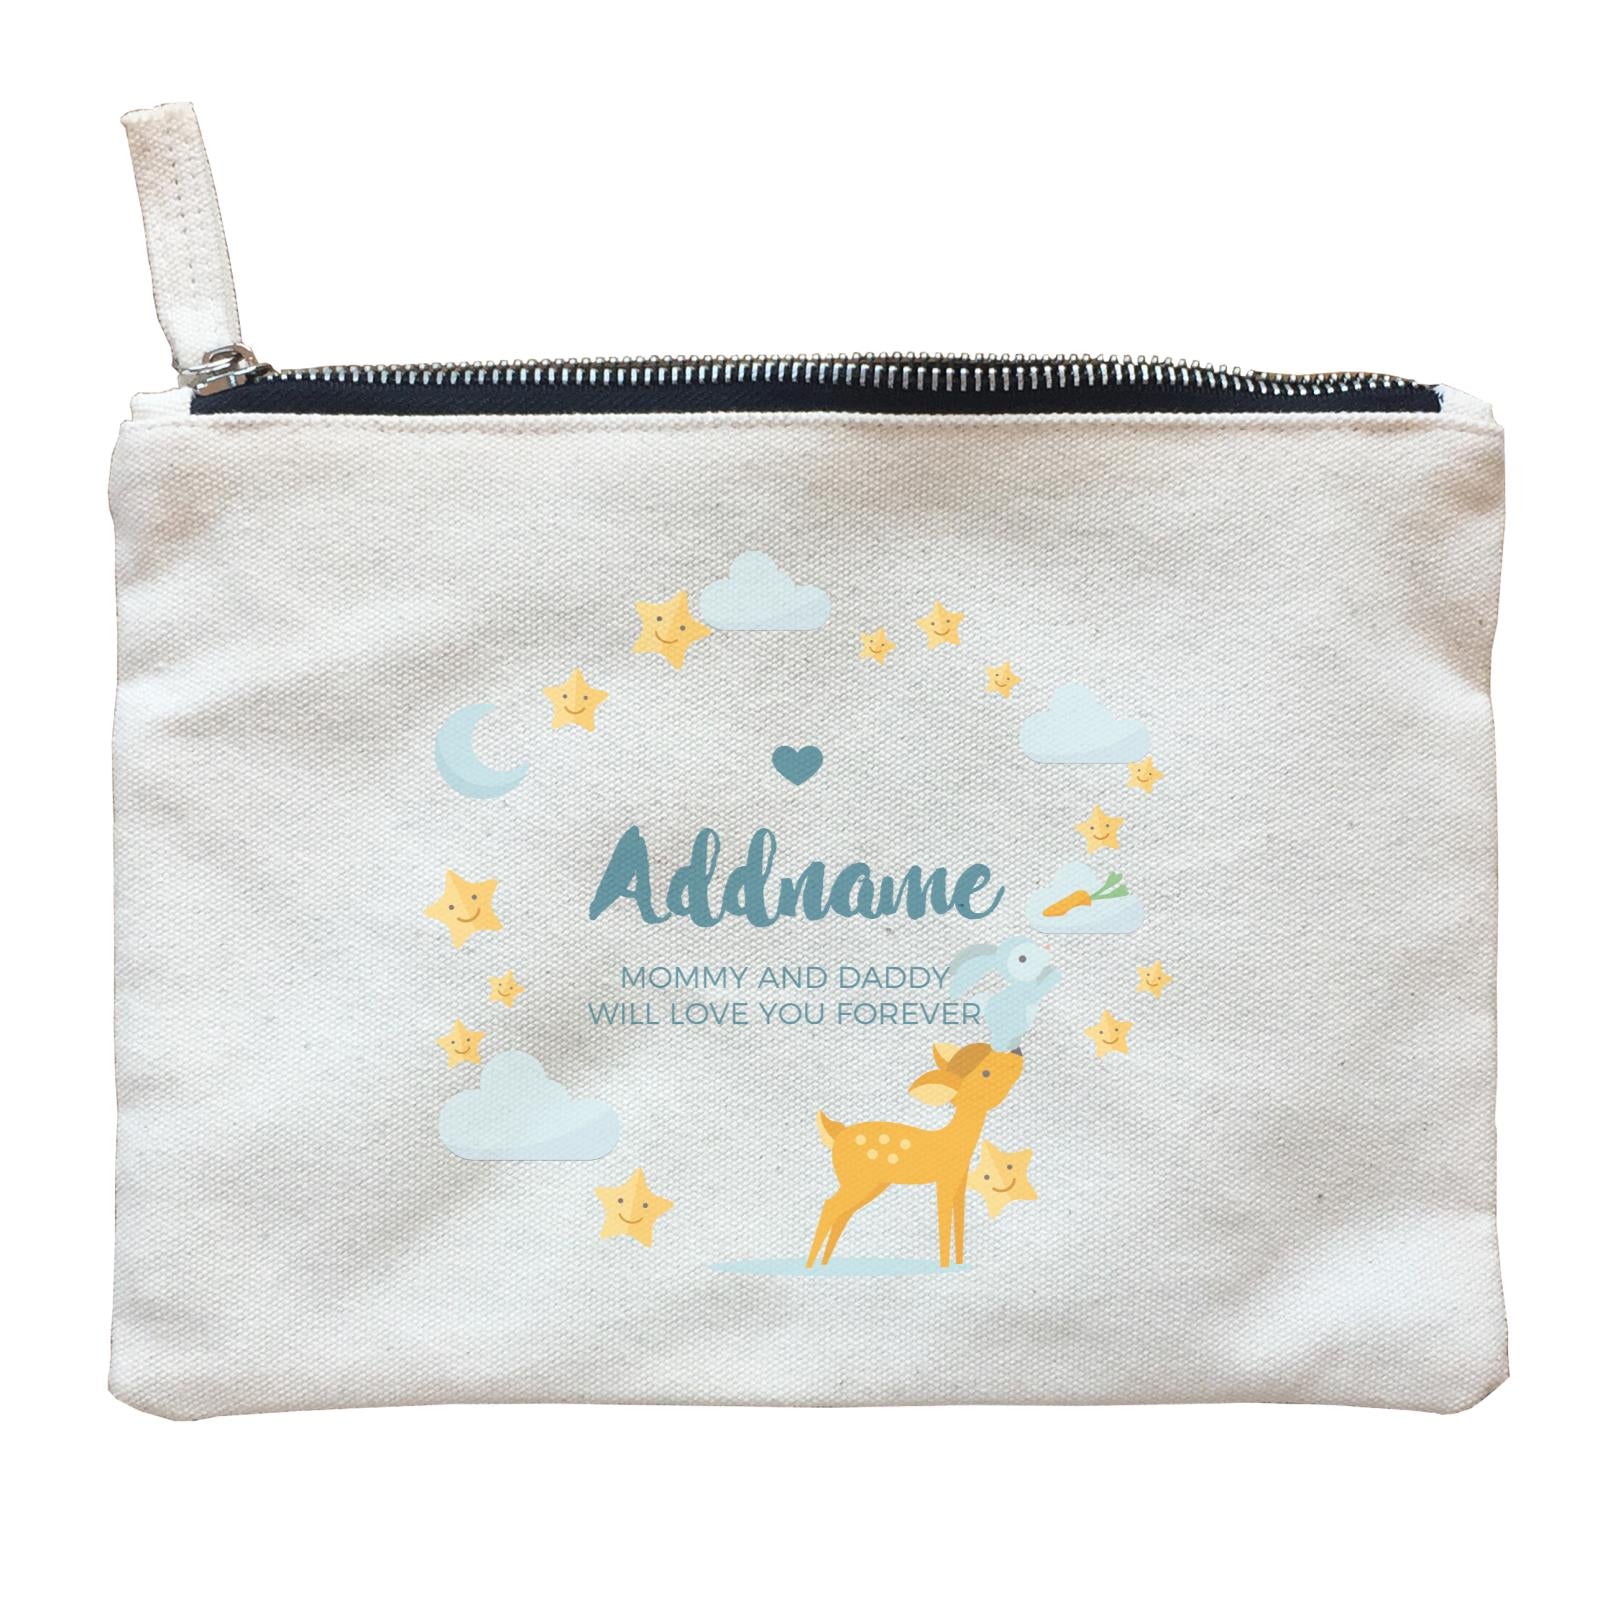 Cute Deer and Rabbit with Star and Moon Elements Personalizable with Name and Text Zipper Pouch